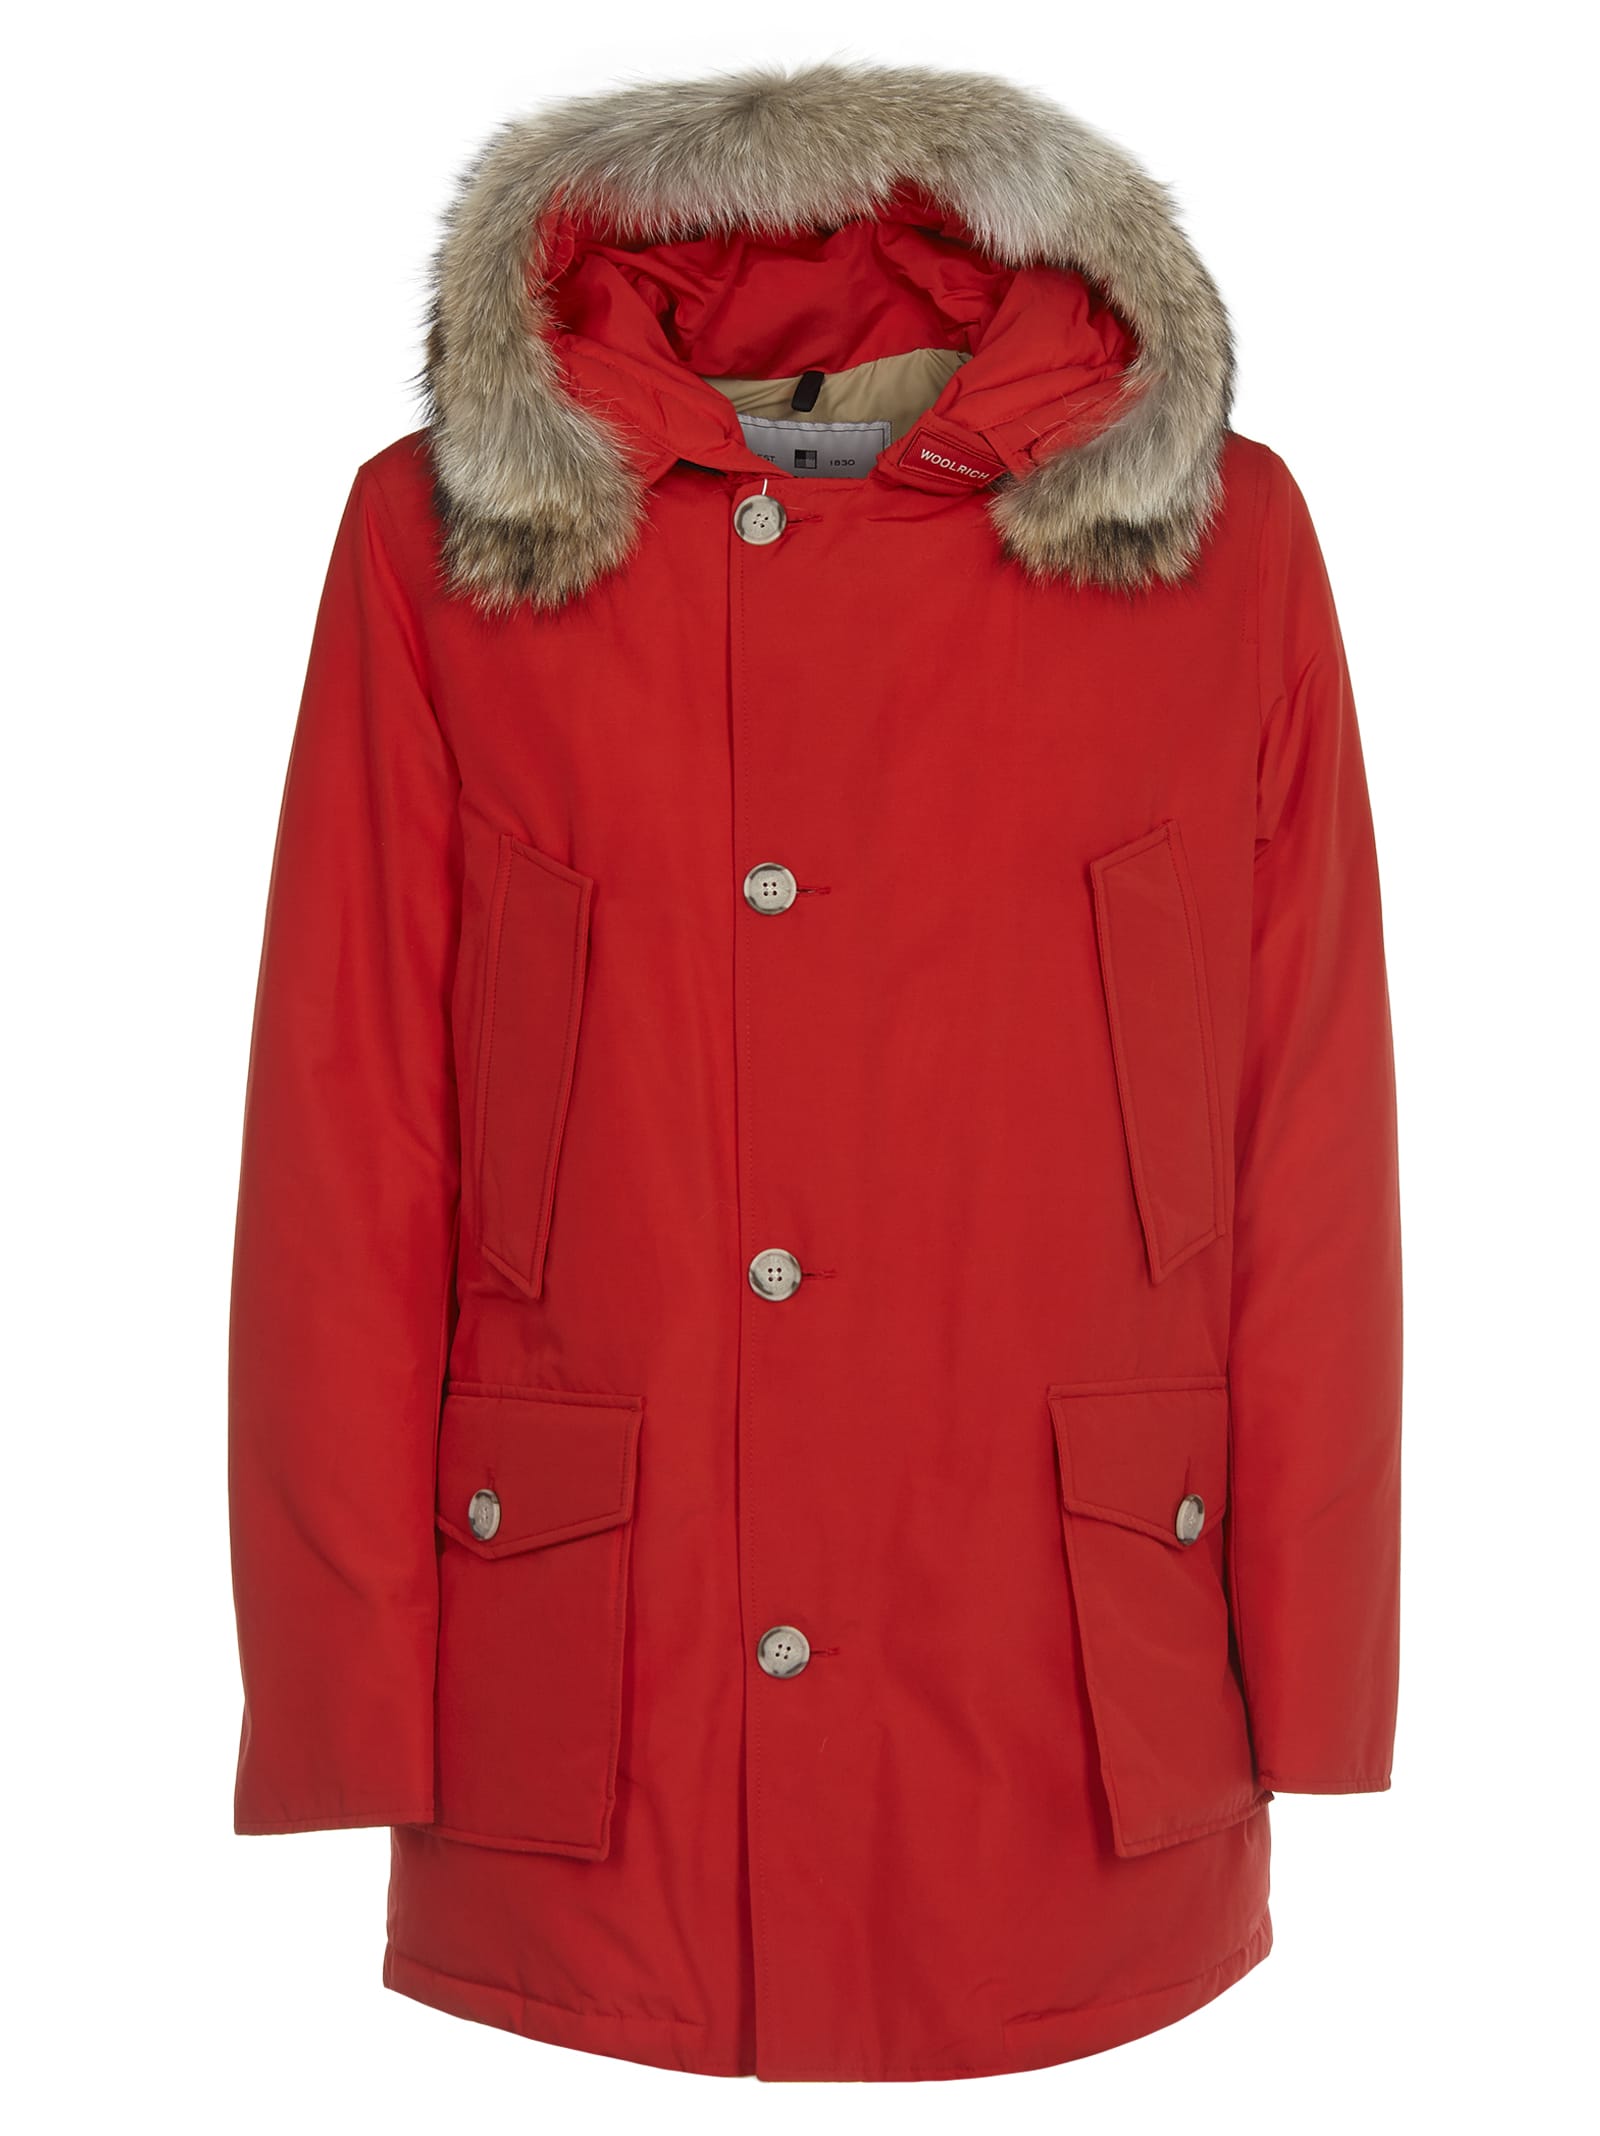 Woolrich Red Multi-pocket Arctic Parka